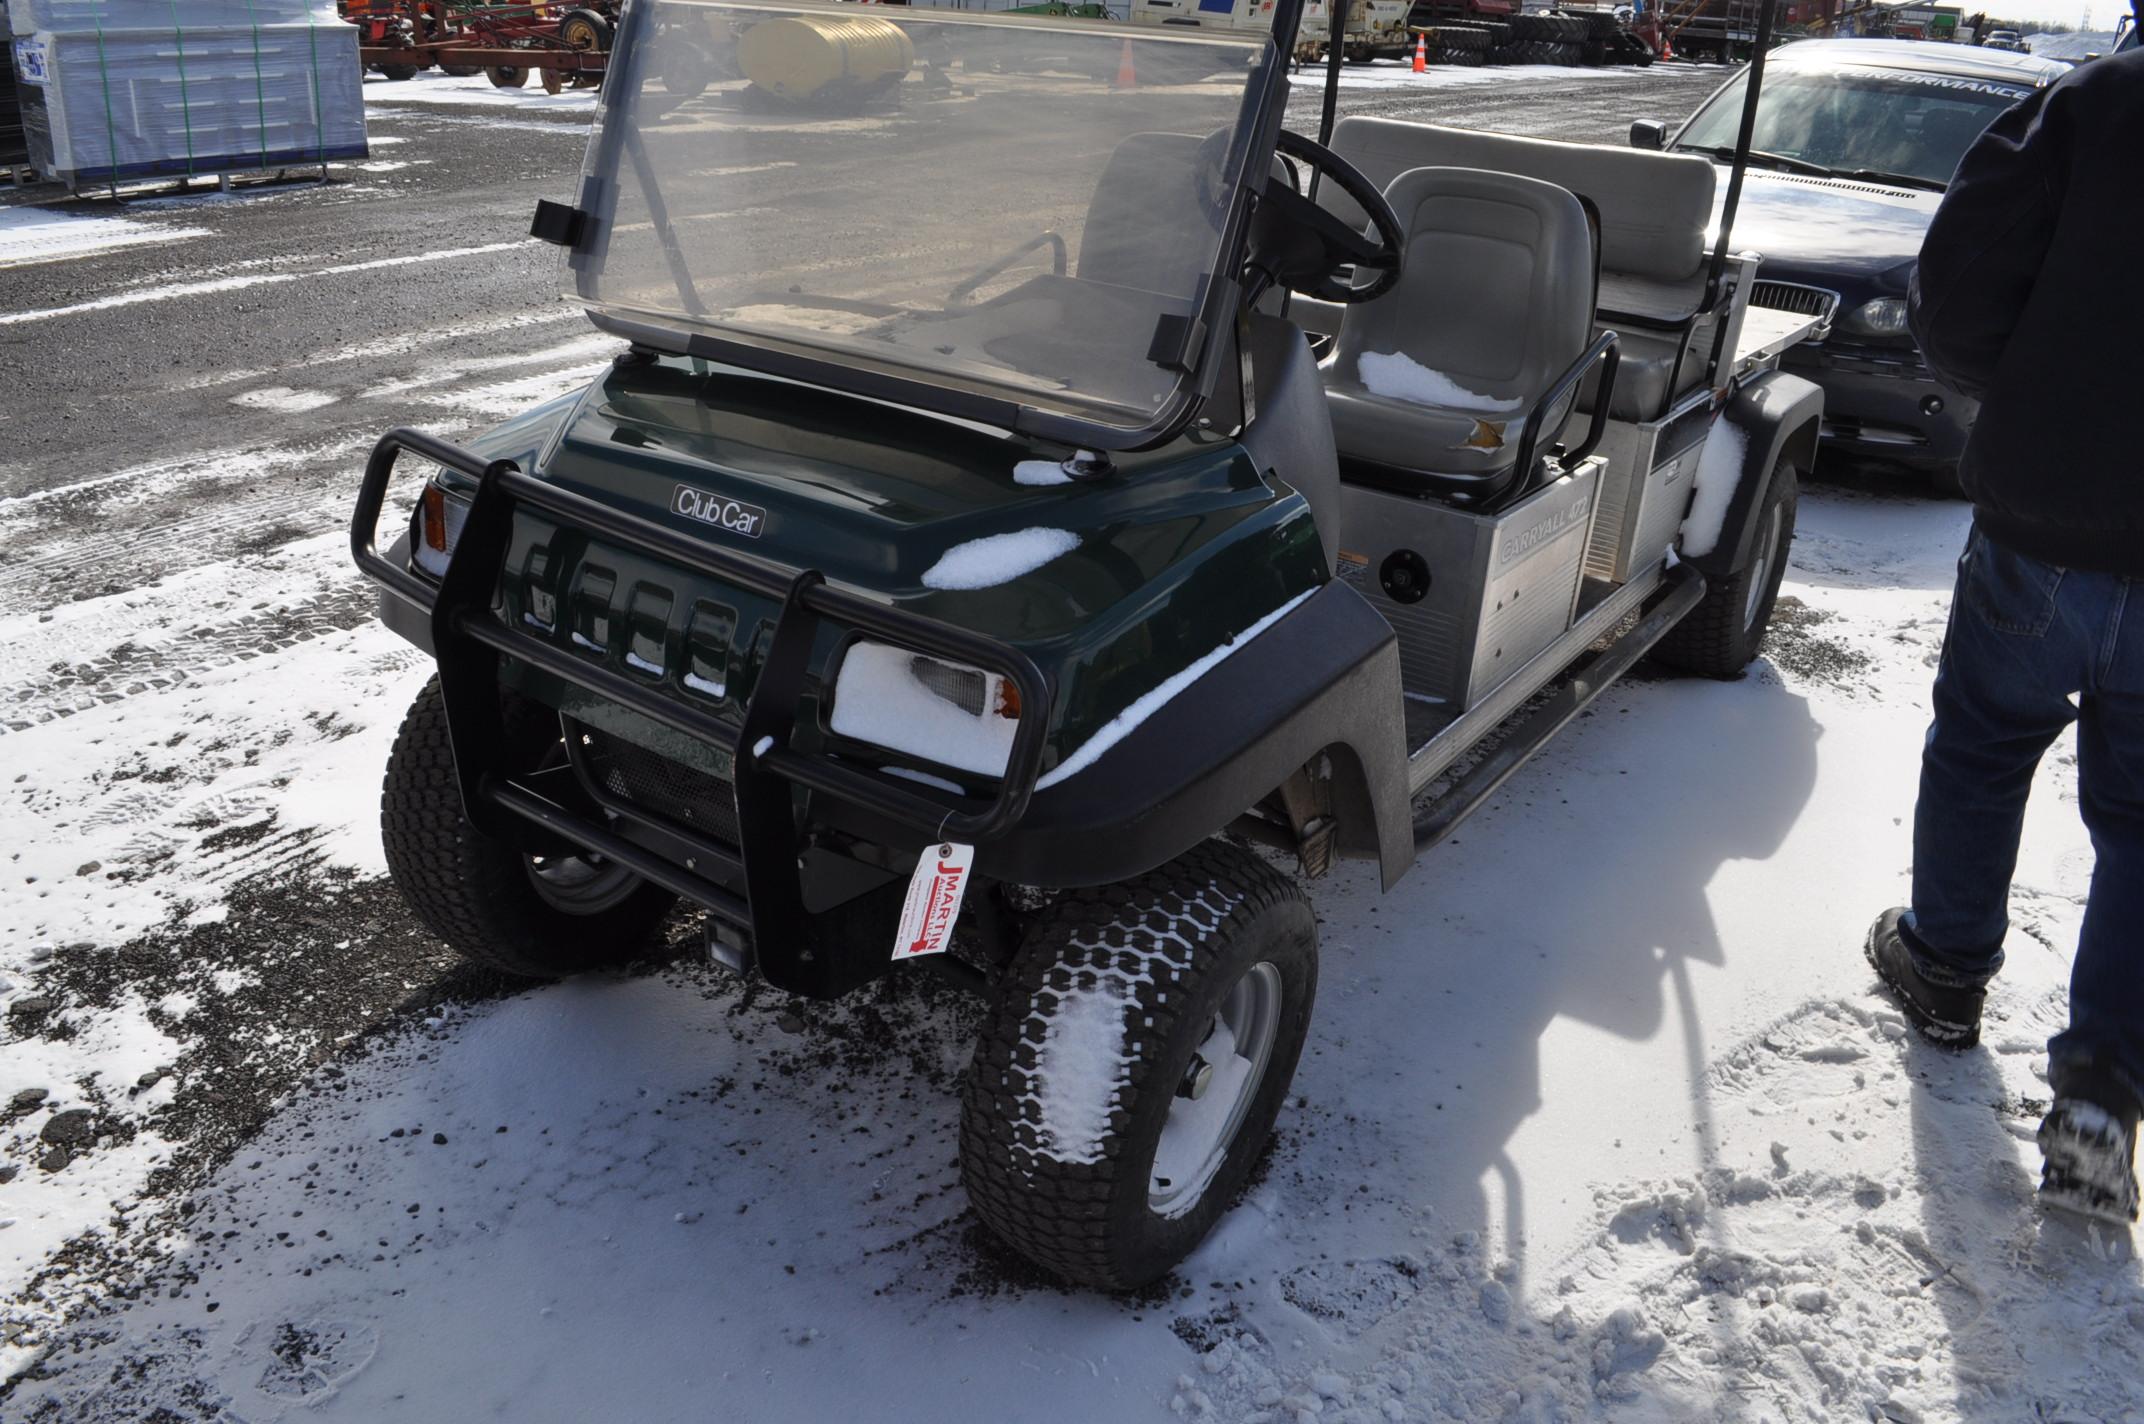 Clubcar 472 carry-all w/ 3103hrs, gas, dif lock, 4 seater